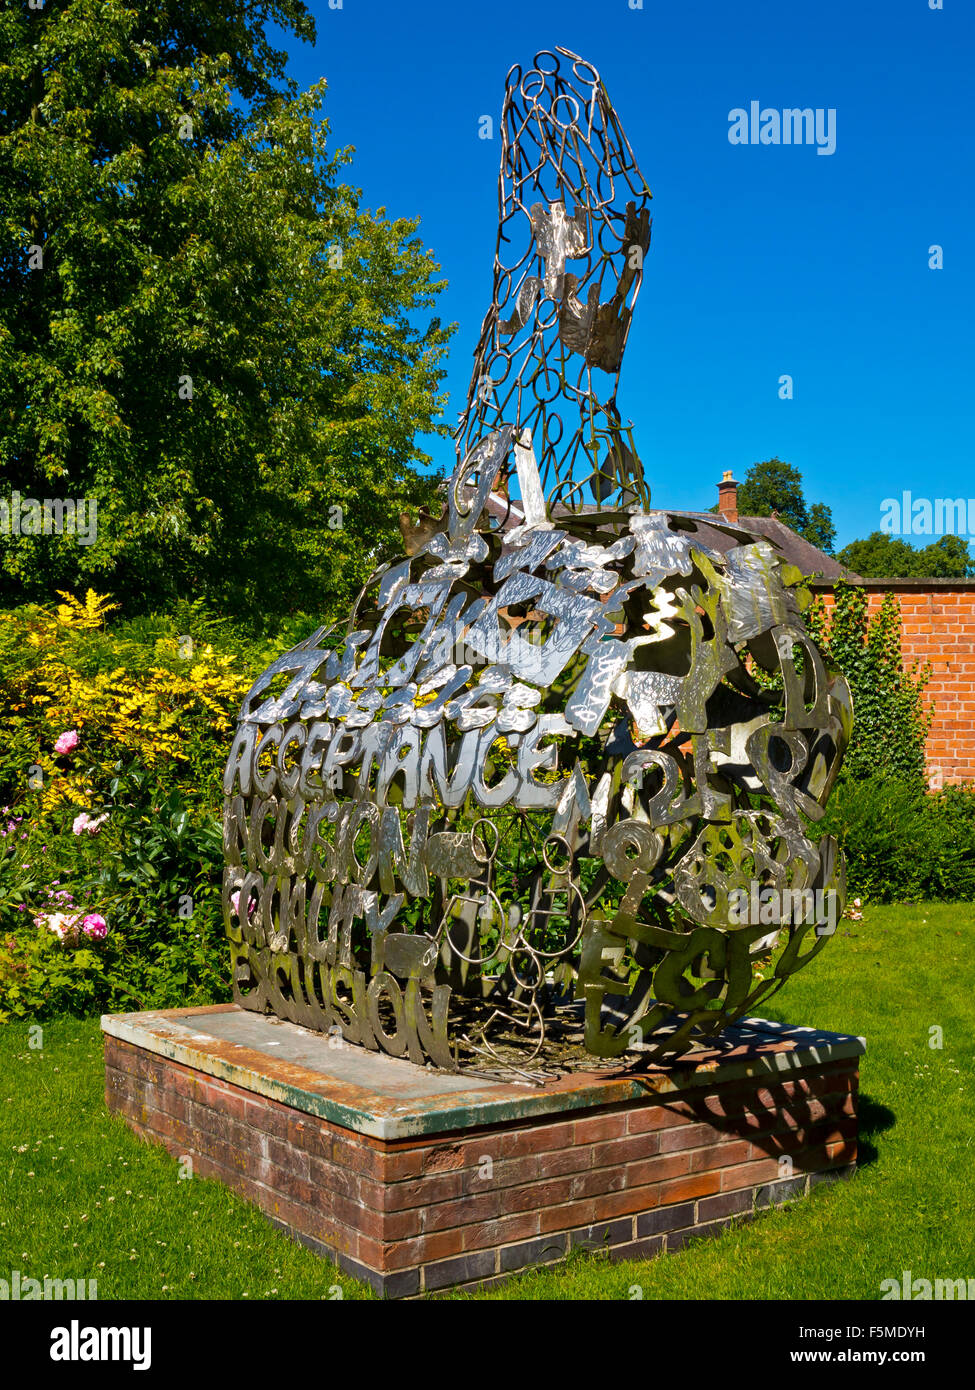 Sculpture in garden at Rufford Abbey near Ollerton in Nottinghamshire England UK in the grounds of Rufford Country Park Stock Photo